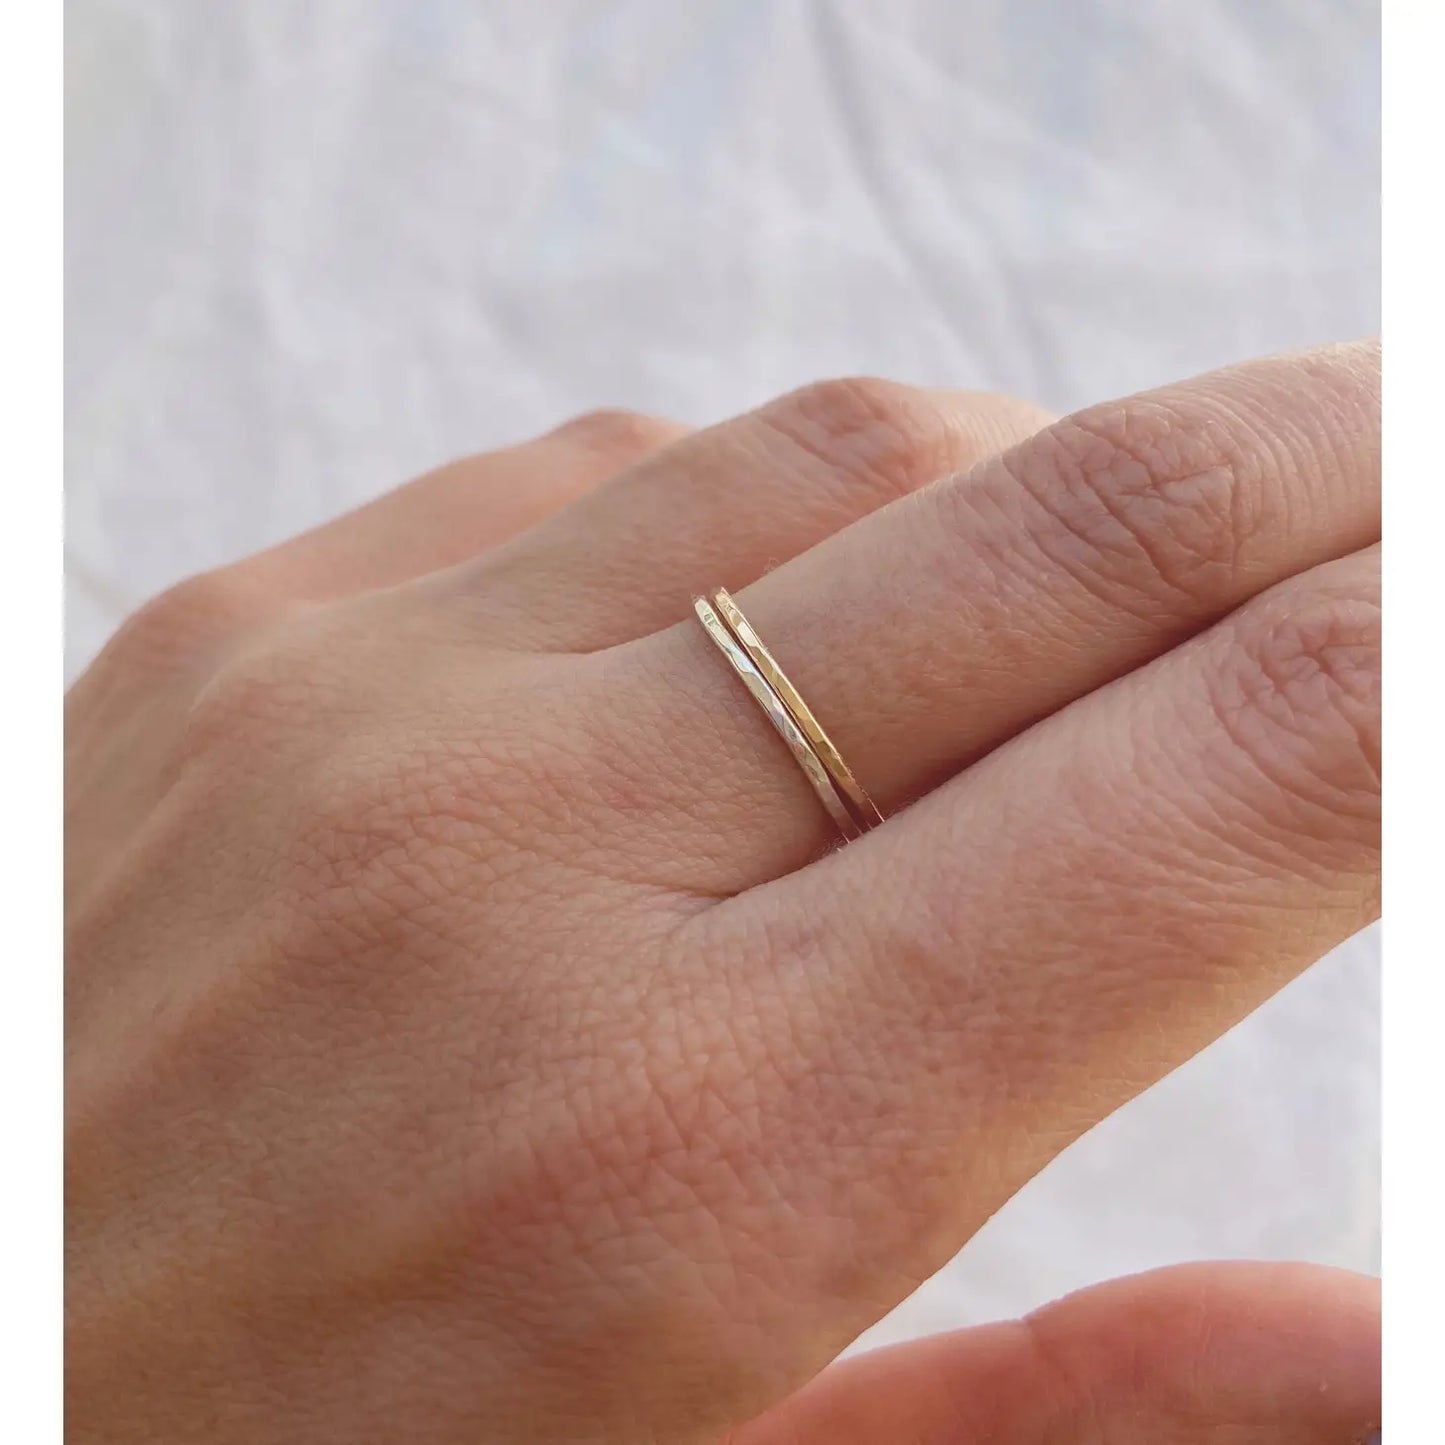 Thin Hammered Stacking Ring (Gold, Silver)